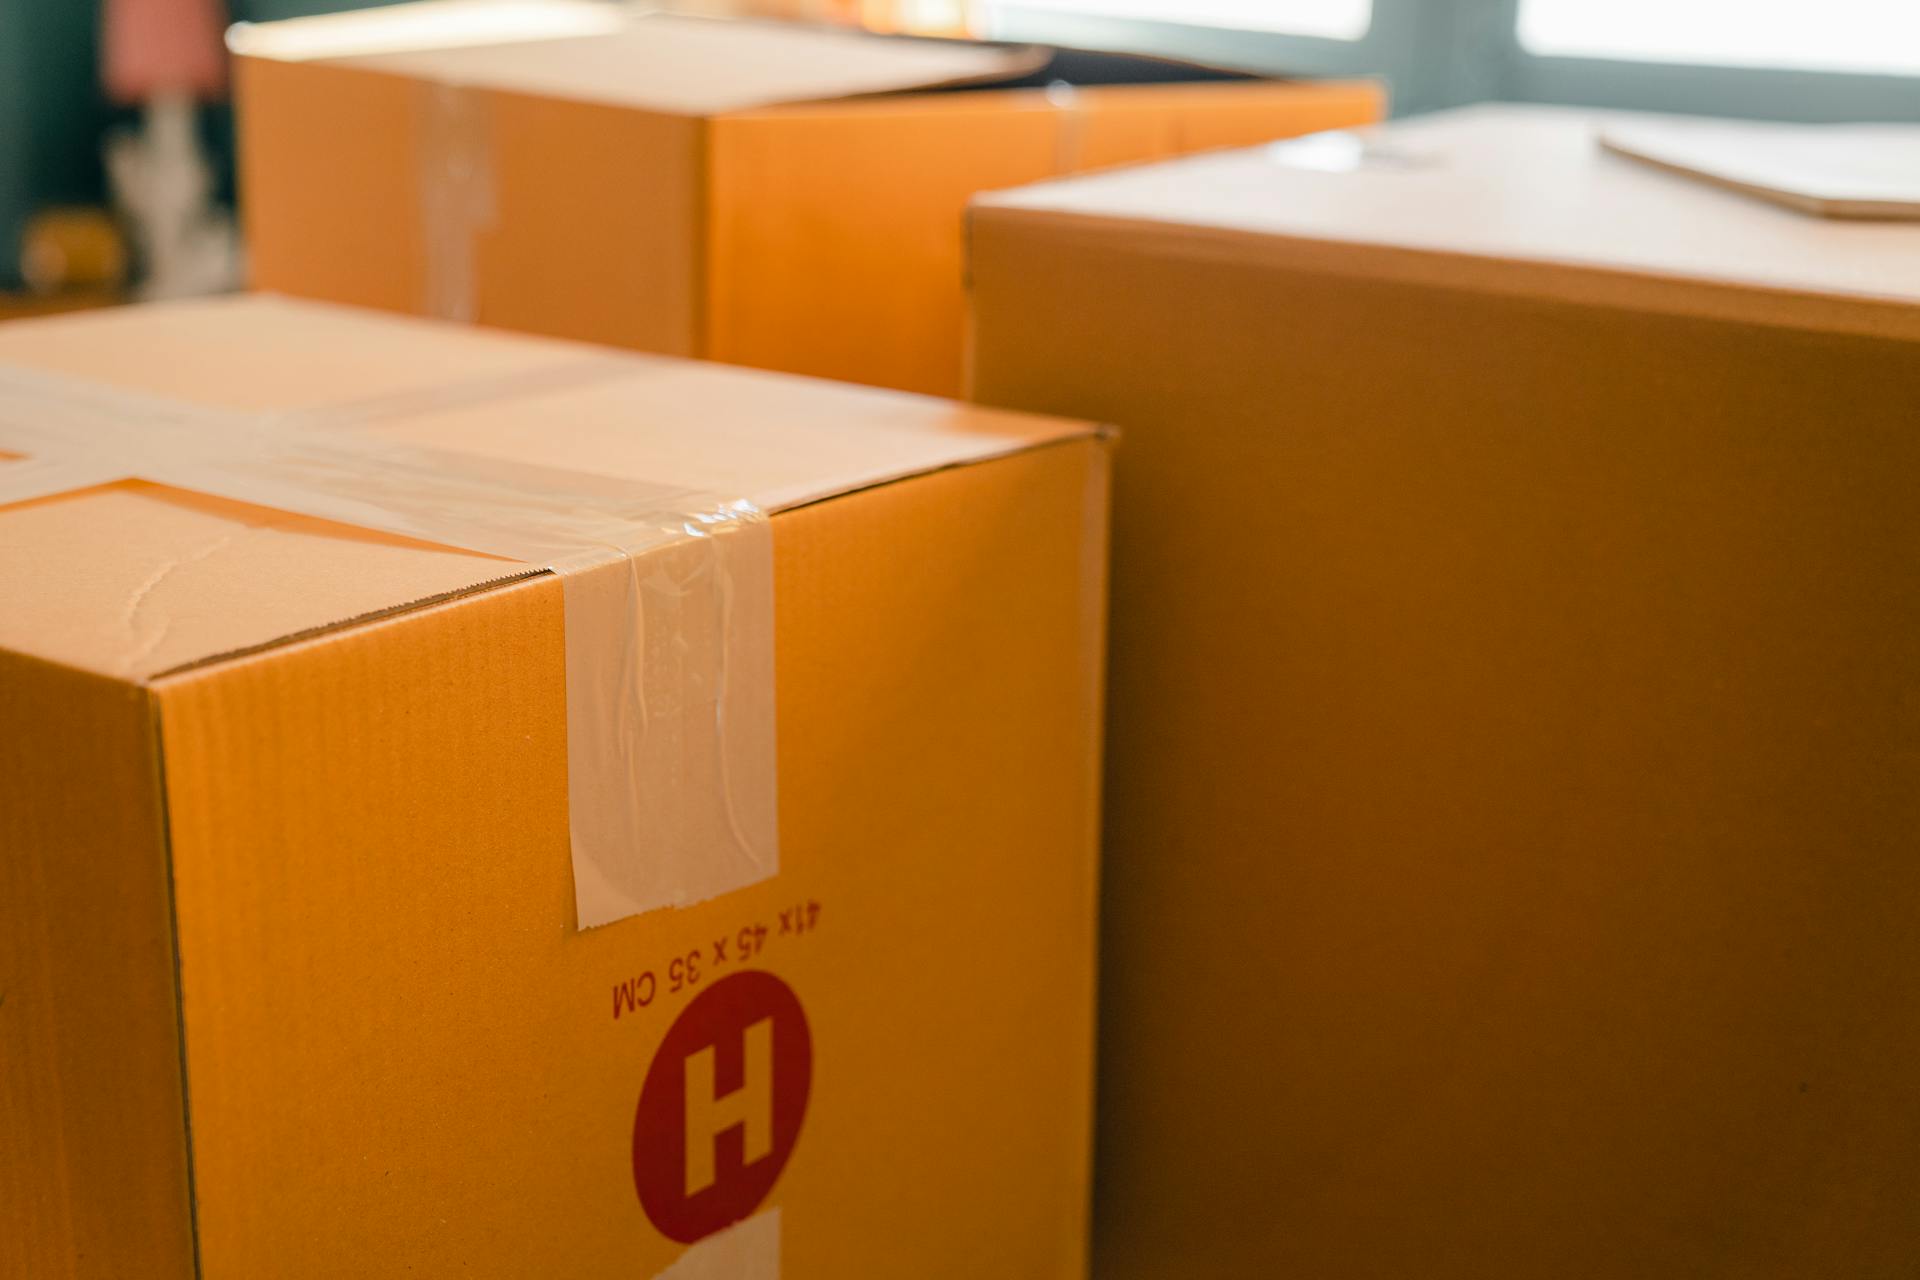 Moving boxes | Source: Pexels